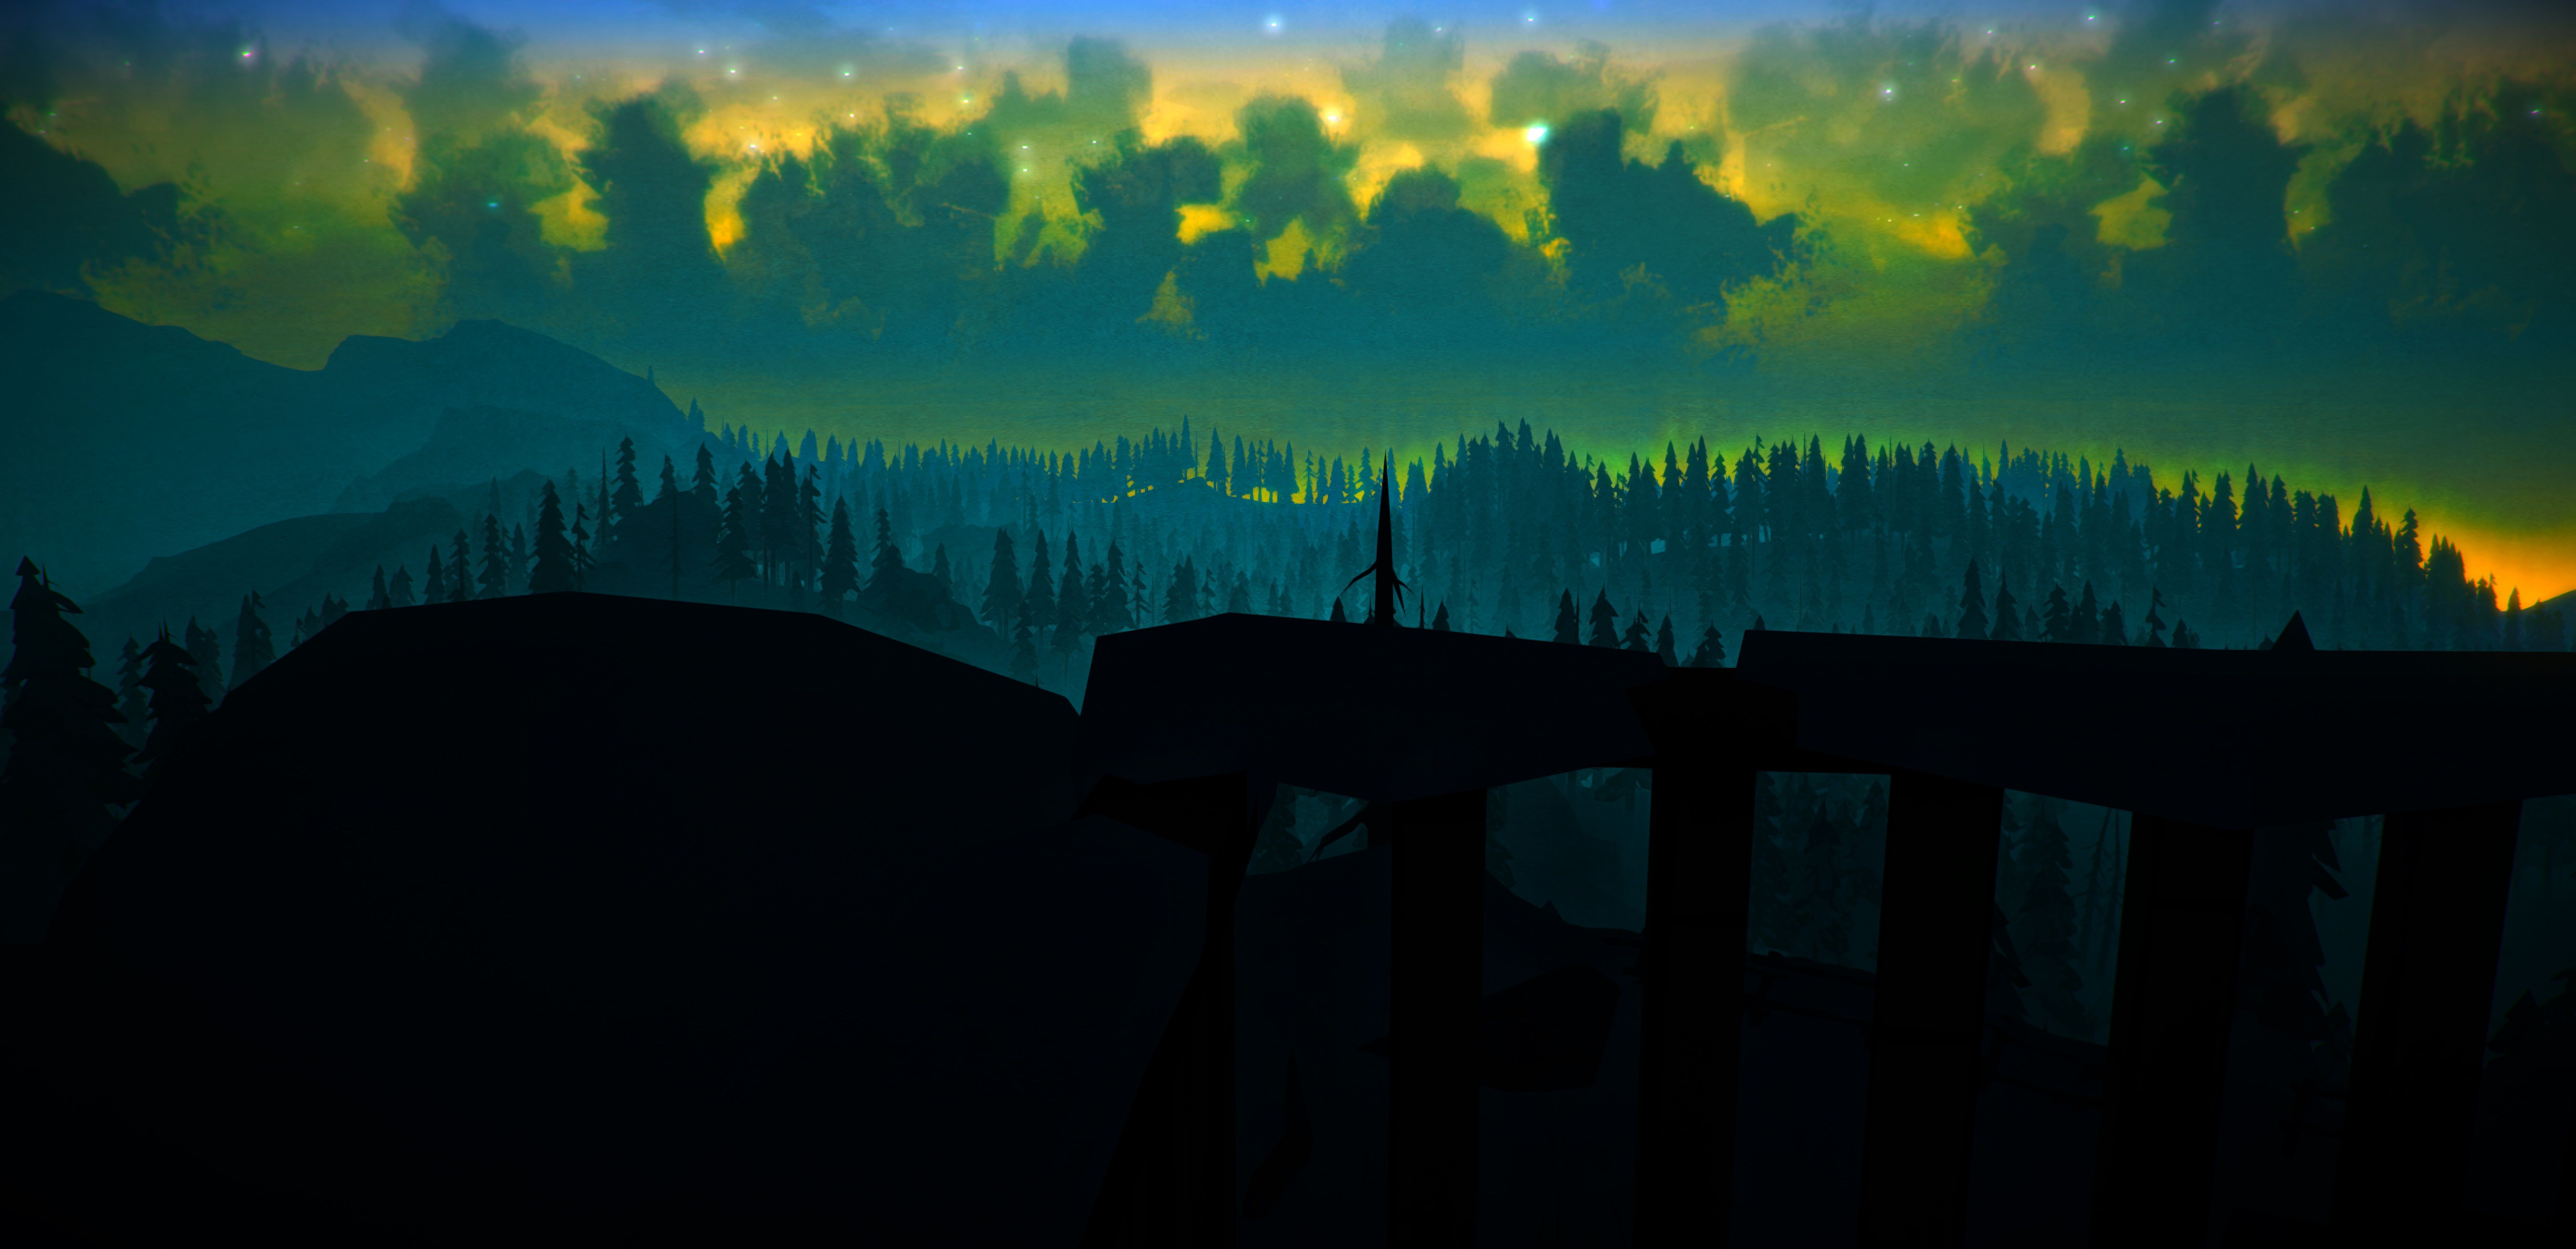 13 The Long Dark HD Wallpapers | Backgrounds - Wallpaper Abyss